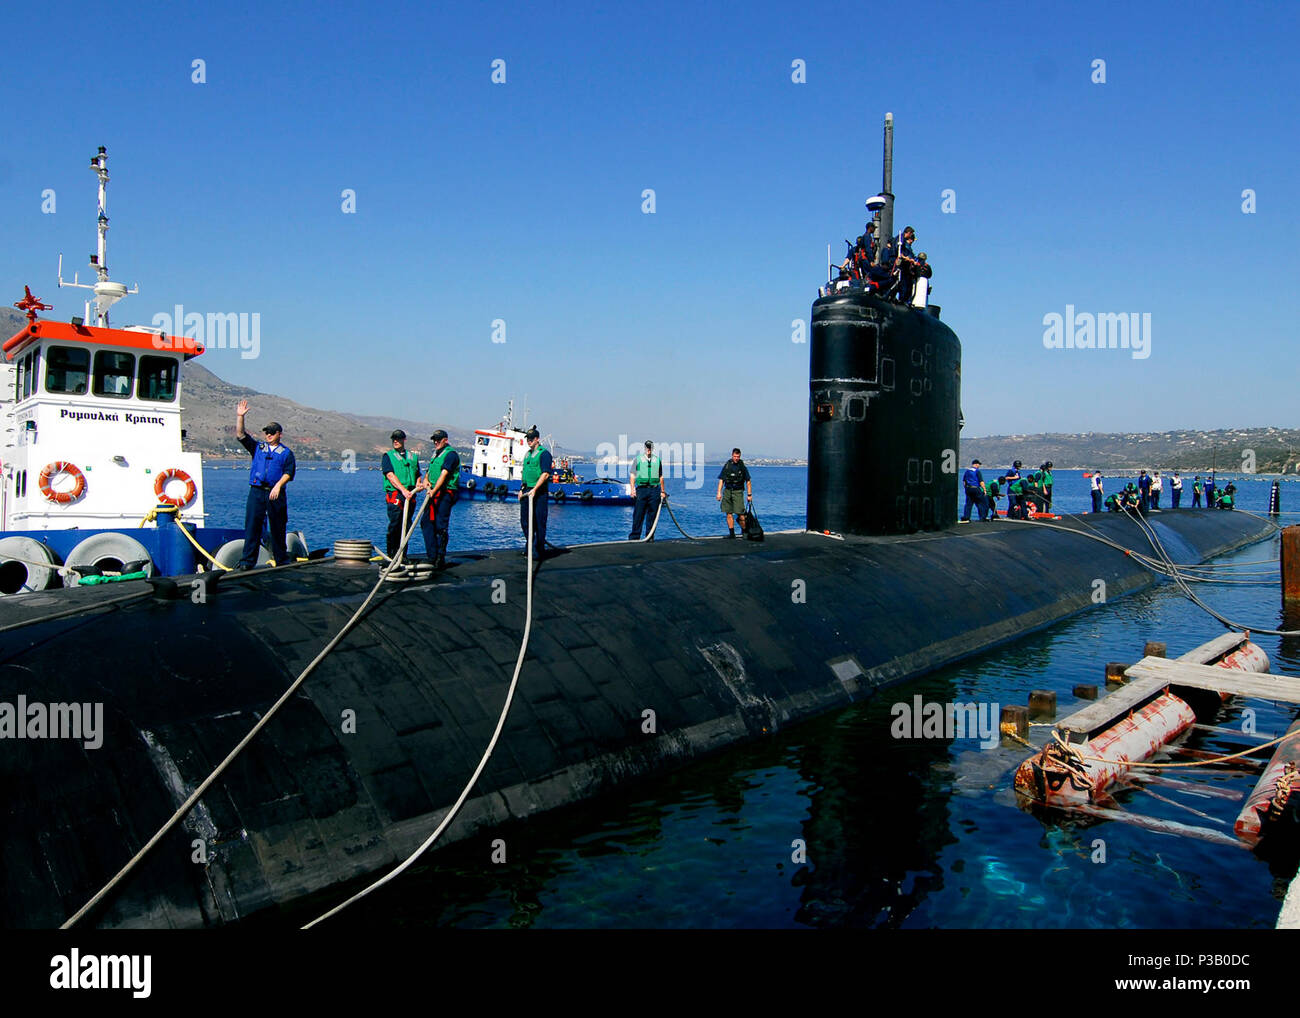 BAY, Crete (June 11, 2008) Sailors conduct mooring operations as the fast-attack submarine USS Albany (SSN 753) arrives in Souda Bay for a routine port visit. Albany is on a scheduled six-month deployment as part of the NASSAU Expeditionary Strike Group operating in the U.S. 6th Fleet area of responsibility supporting maritime security operations. U.S. Navy Stock Photo